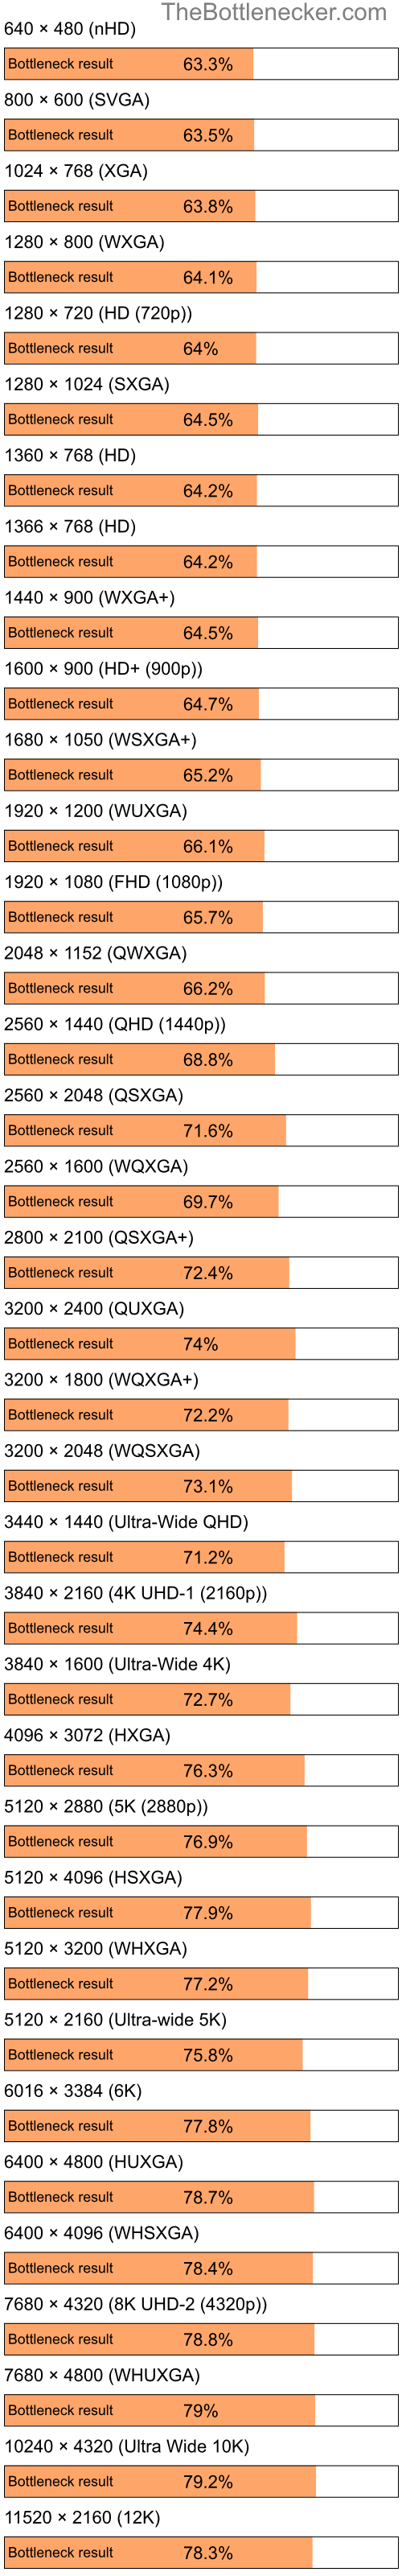 Bottleneck results by resolution for Intel Pentium 4 and AMD Radeon X1300 in Processor Intense Tasks